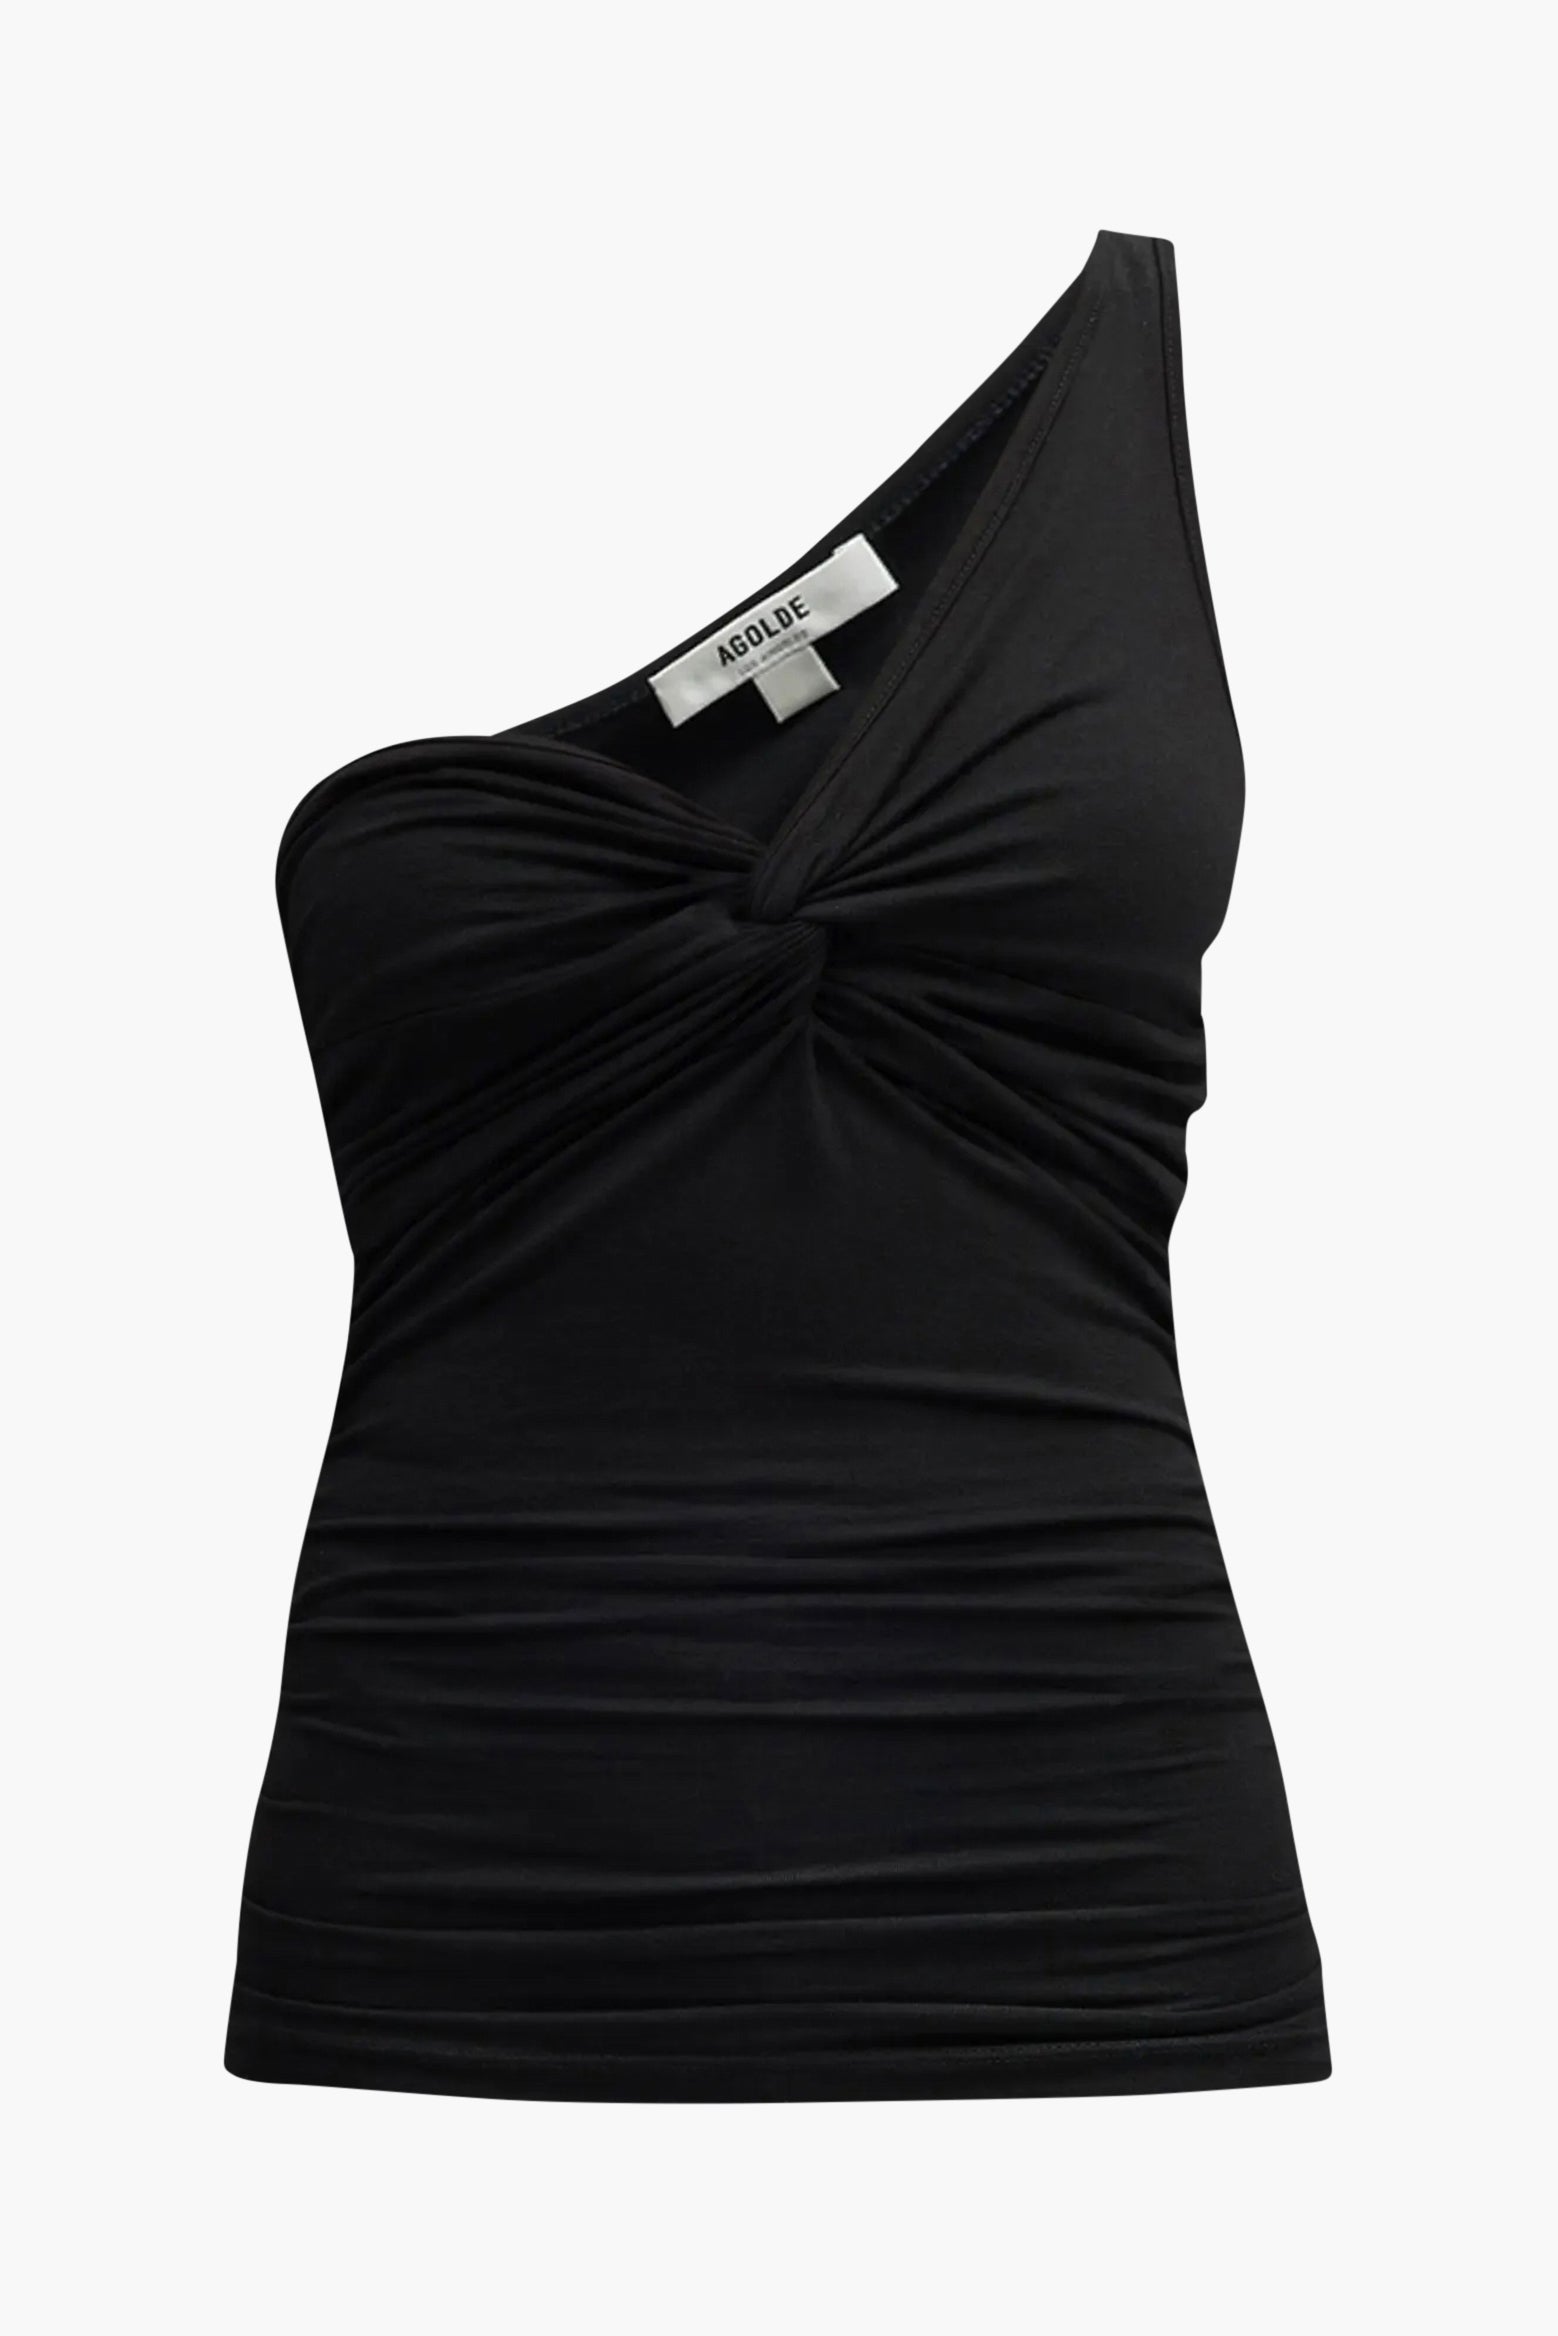 Agolde Domino Top in Black available at TNT The New Trend Australia.